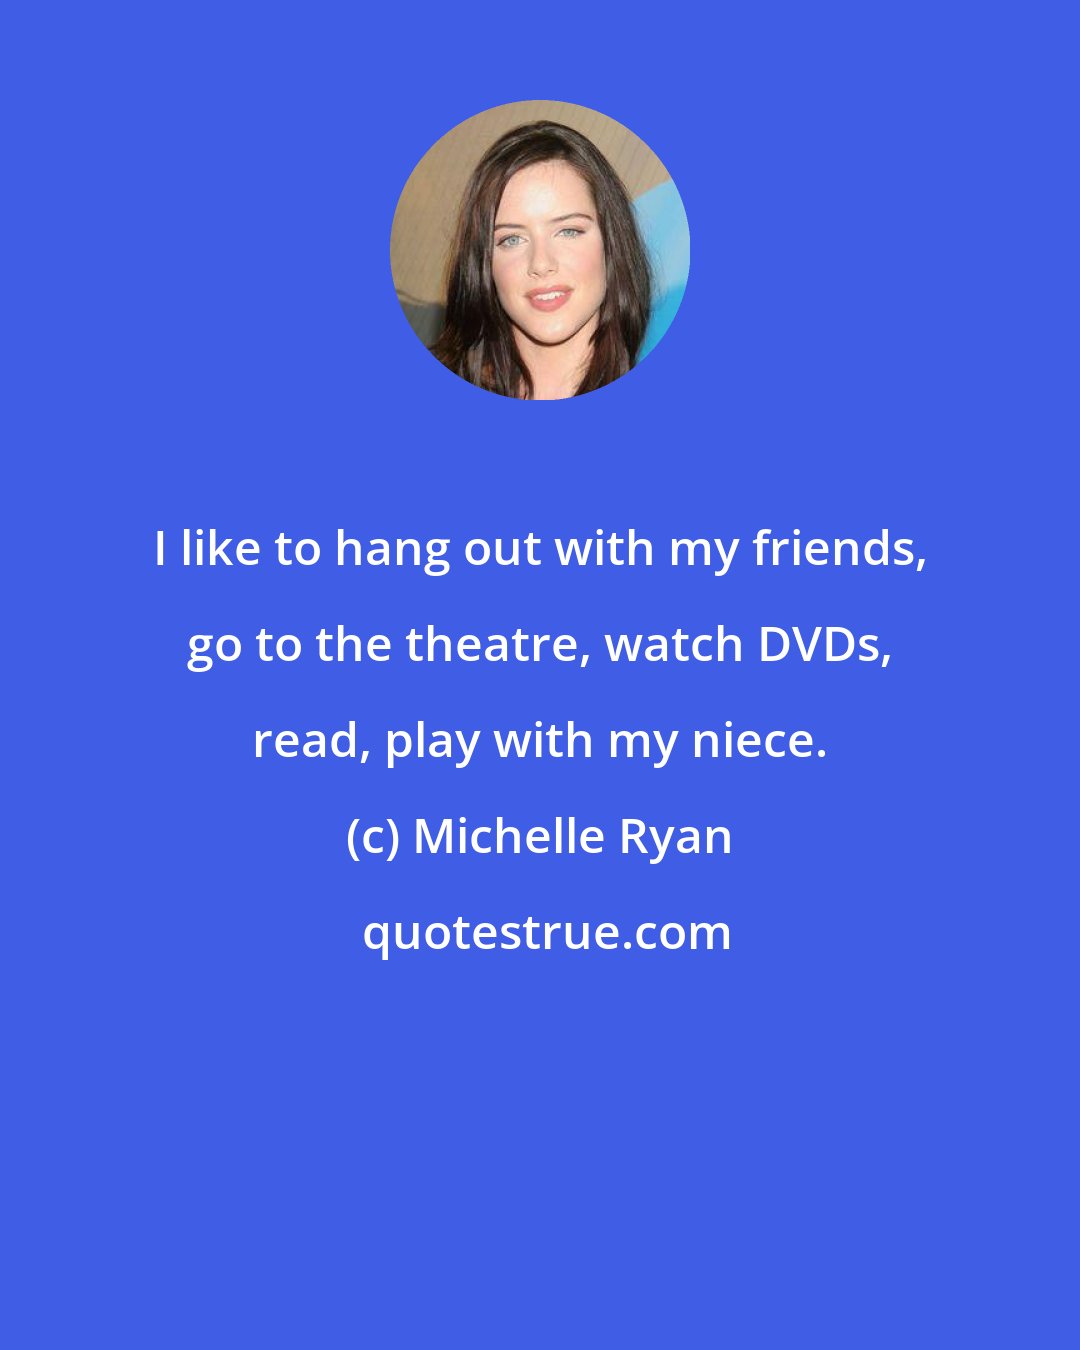 Michelle Ryan: I like to hang out with my friends, go to the theatre, watch DVDs, read, play with my niece.